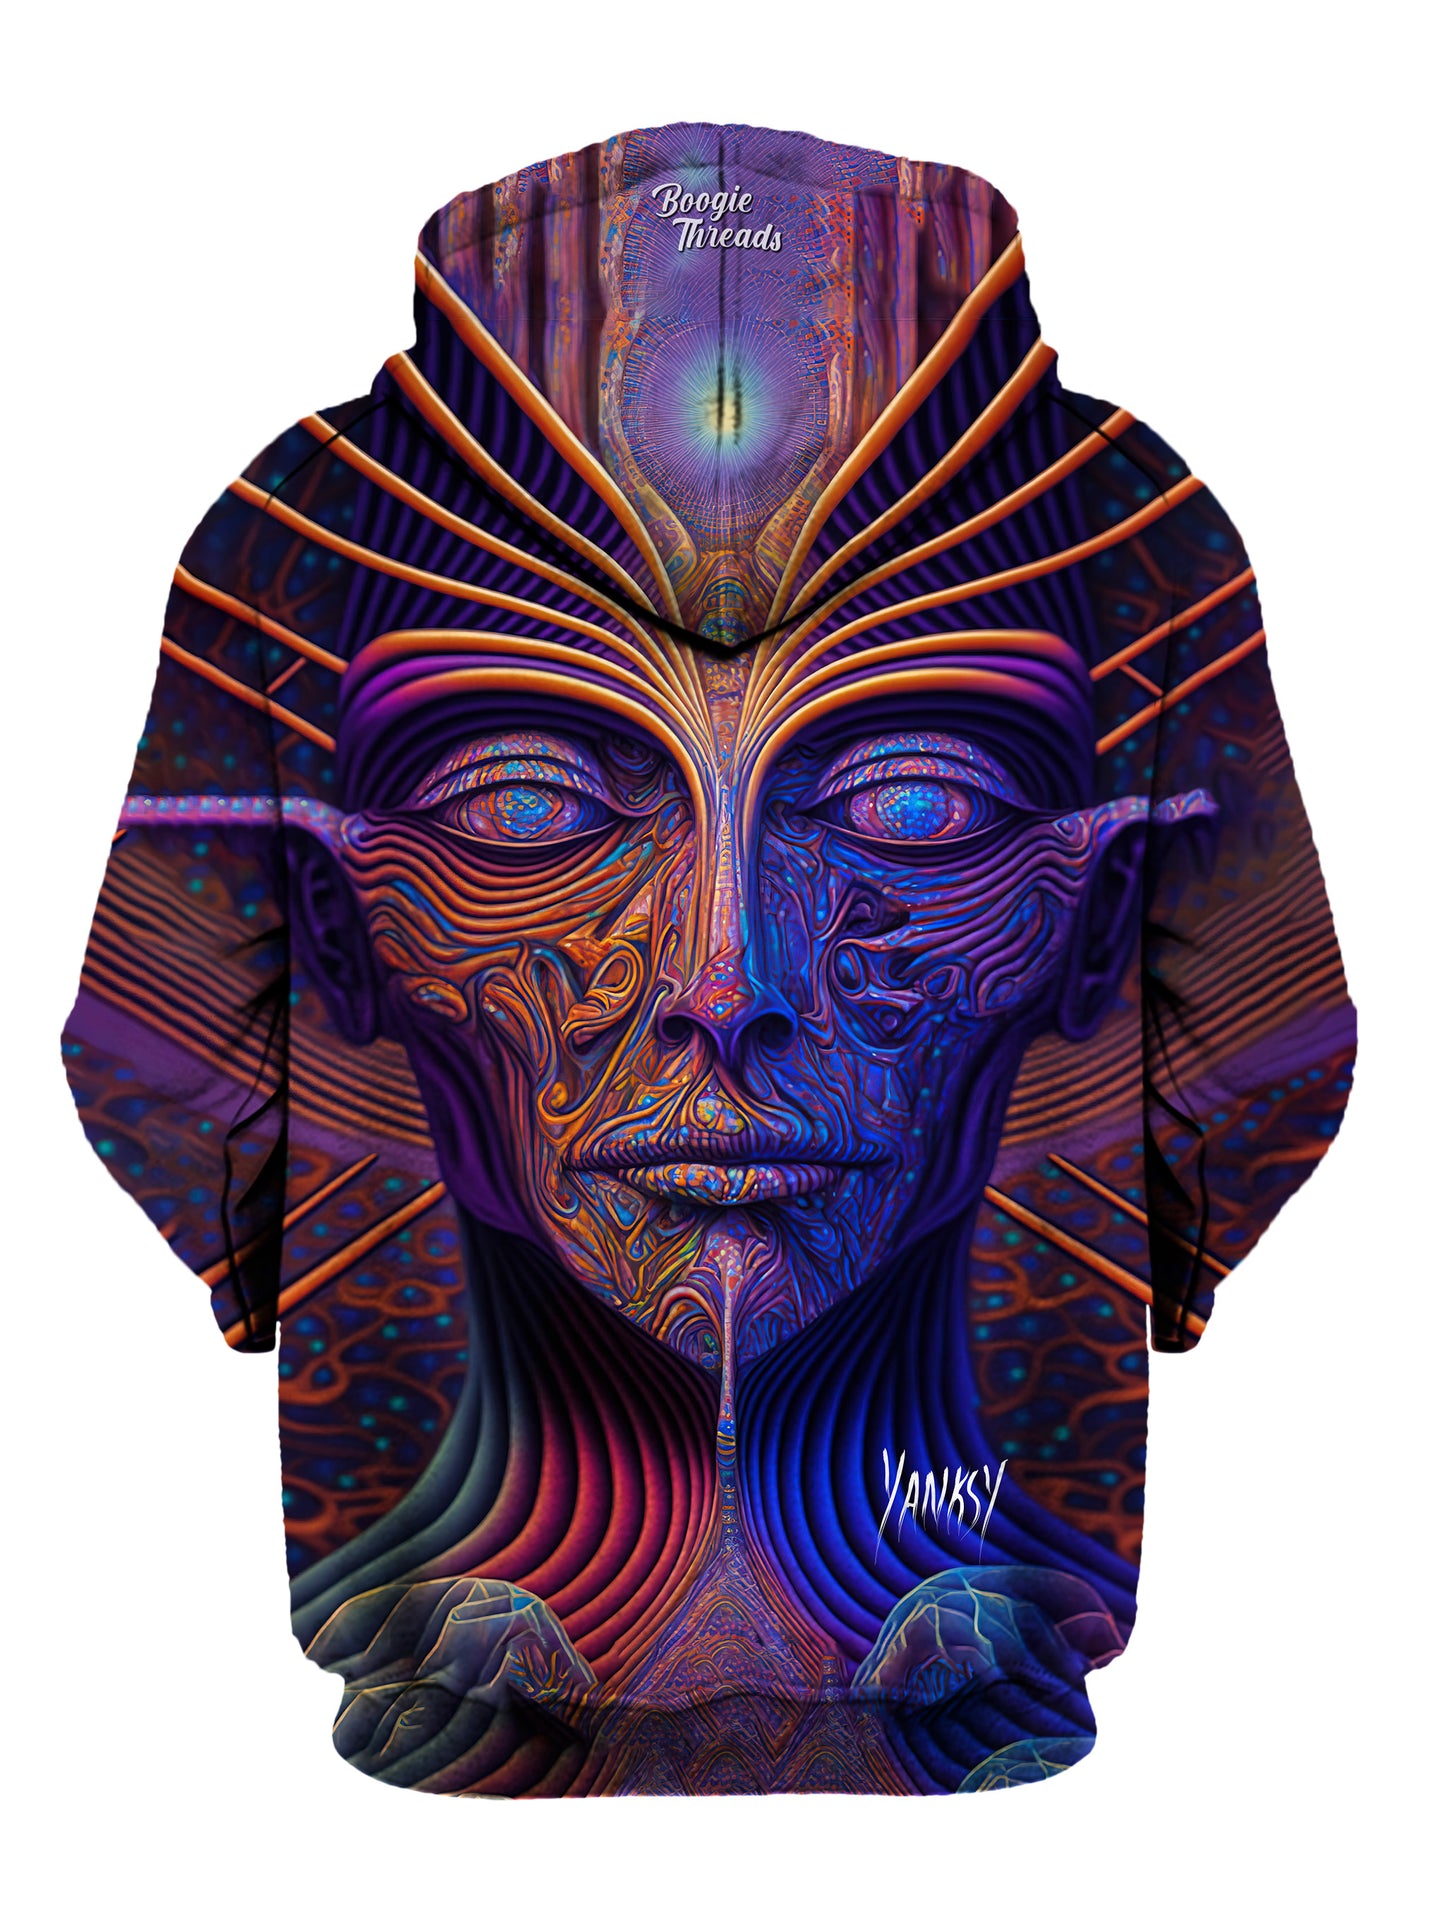 Make a statement with this bold and eye-catching hoodie